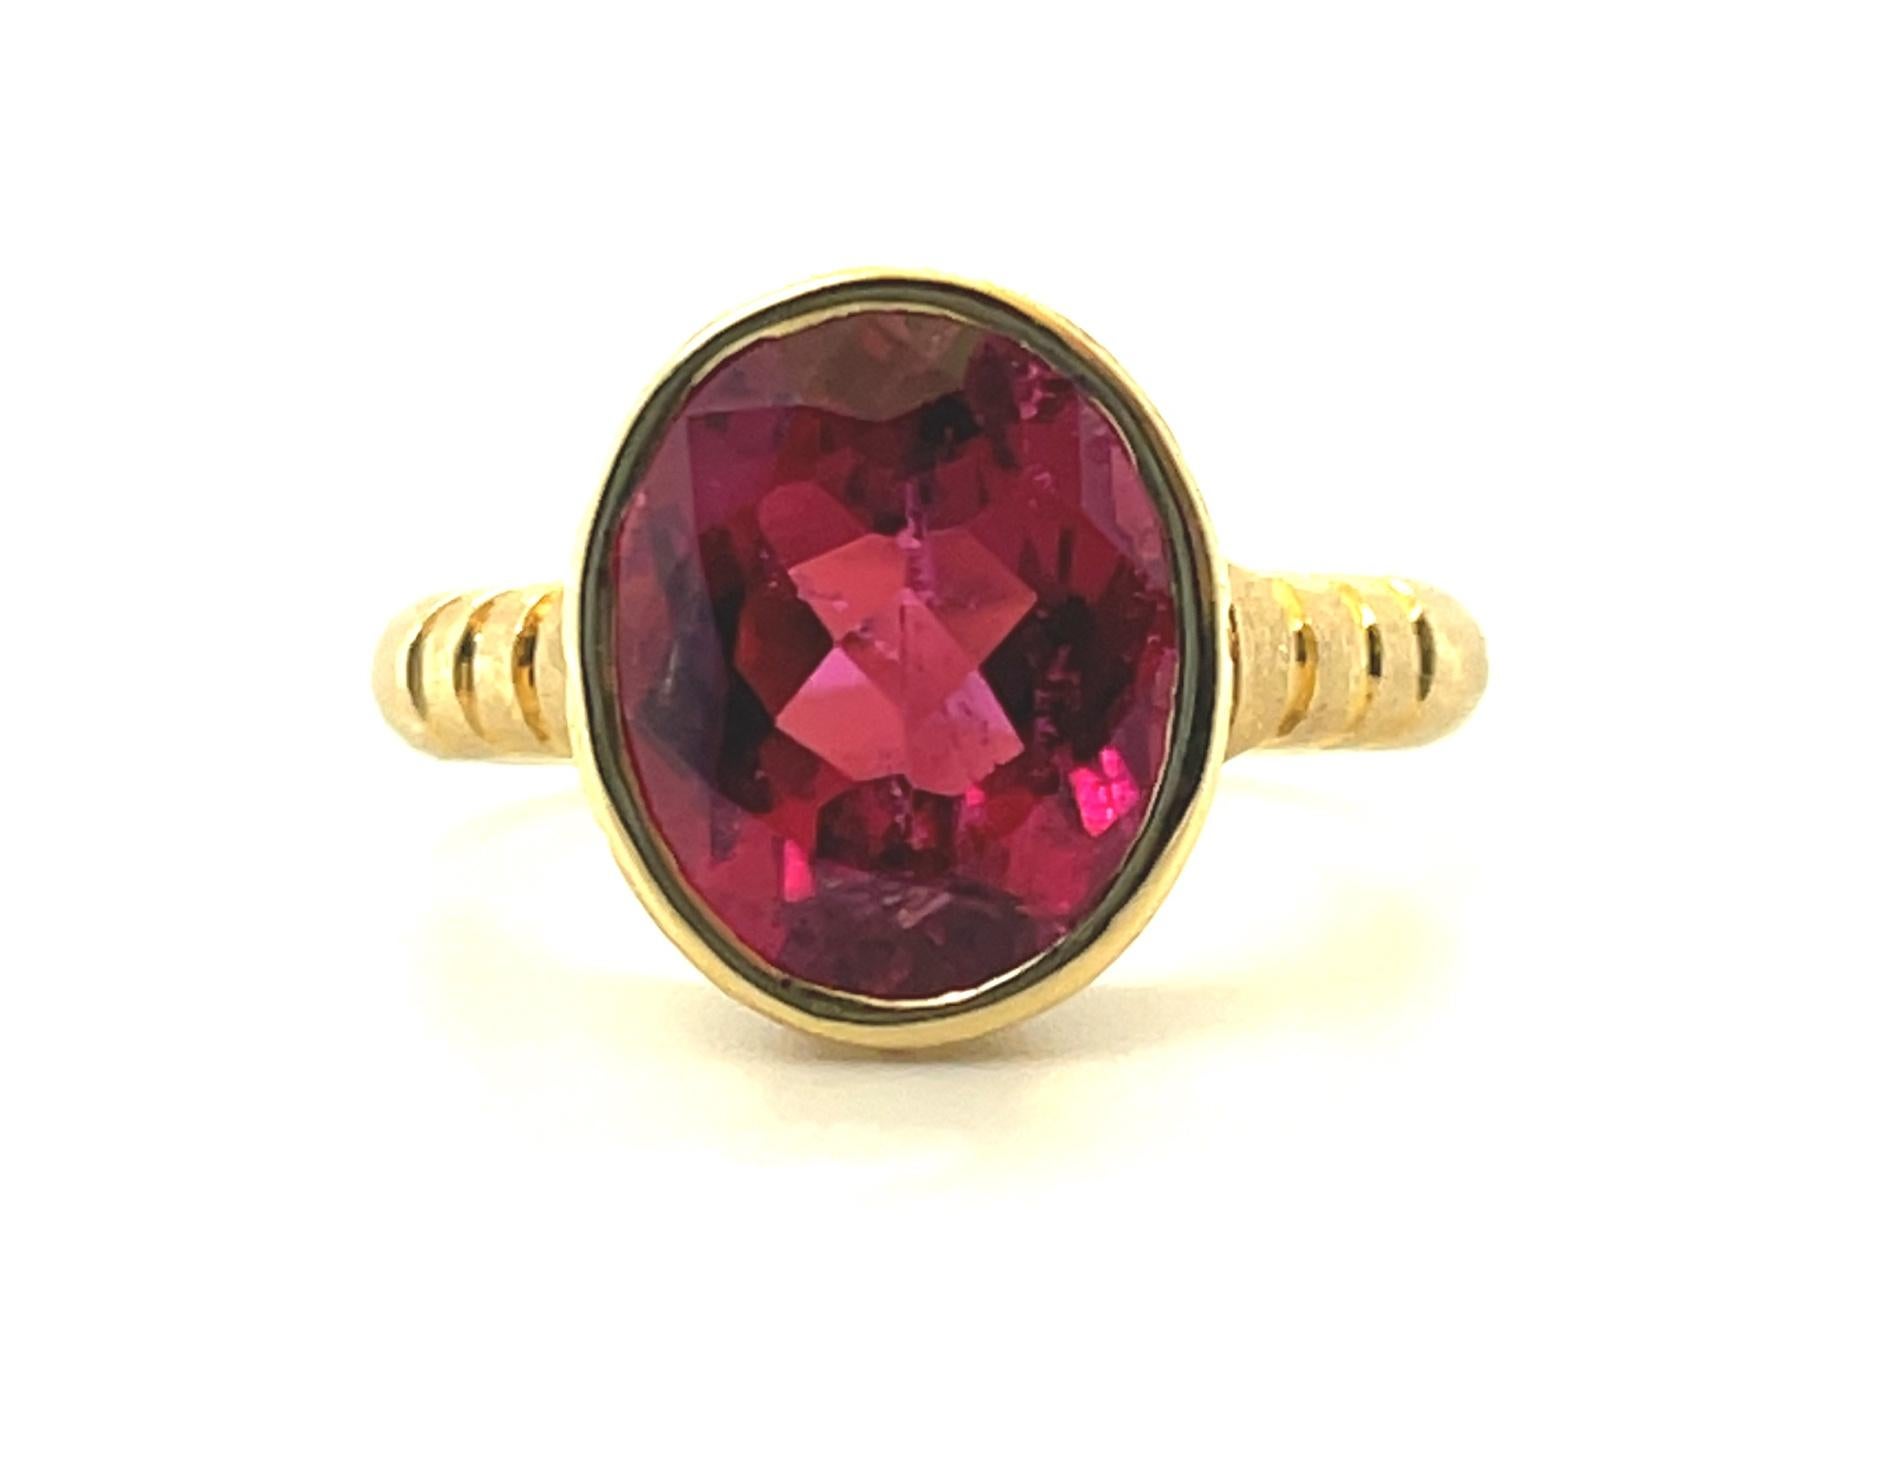 This 18k yellow gold, handmade signature ring features an absolutely stunning rubellite tourmaline of exceptional clarity and vivid, intense pinkish red color. Bezel set with brilliant cut white diamonds, this gem-quality tourmaline shines in a